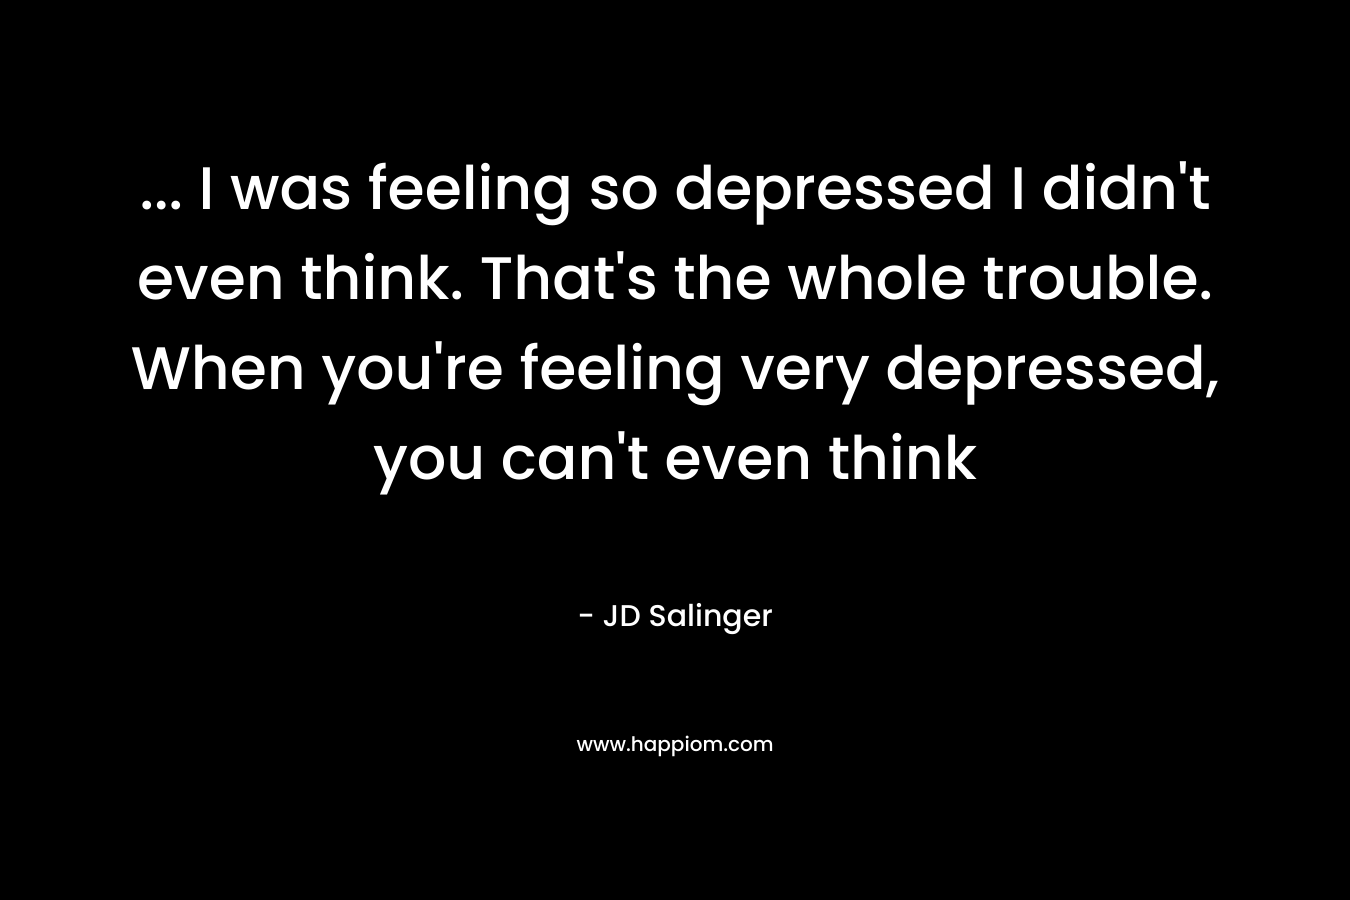 … I was feeling so depressed I didn’t even think. That’s the whole trouble. When you’re feeling very depressed, you can’t even think – JD Salinger